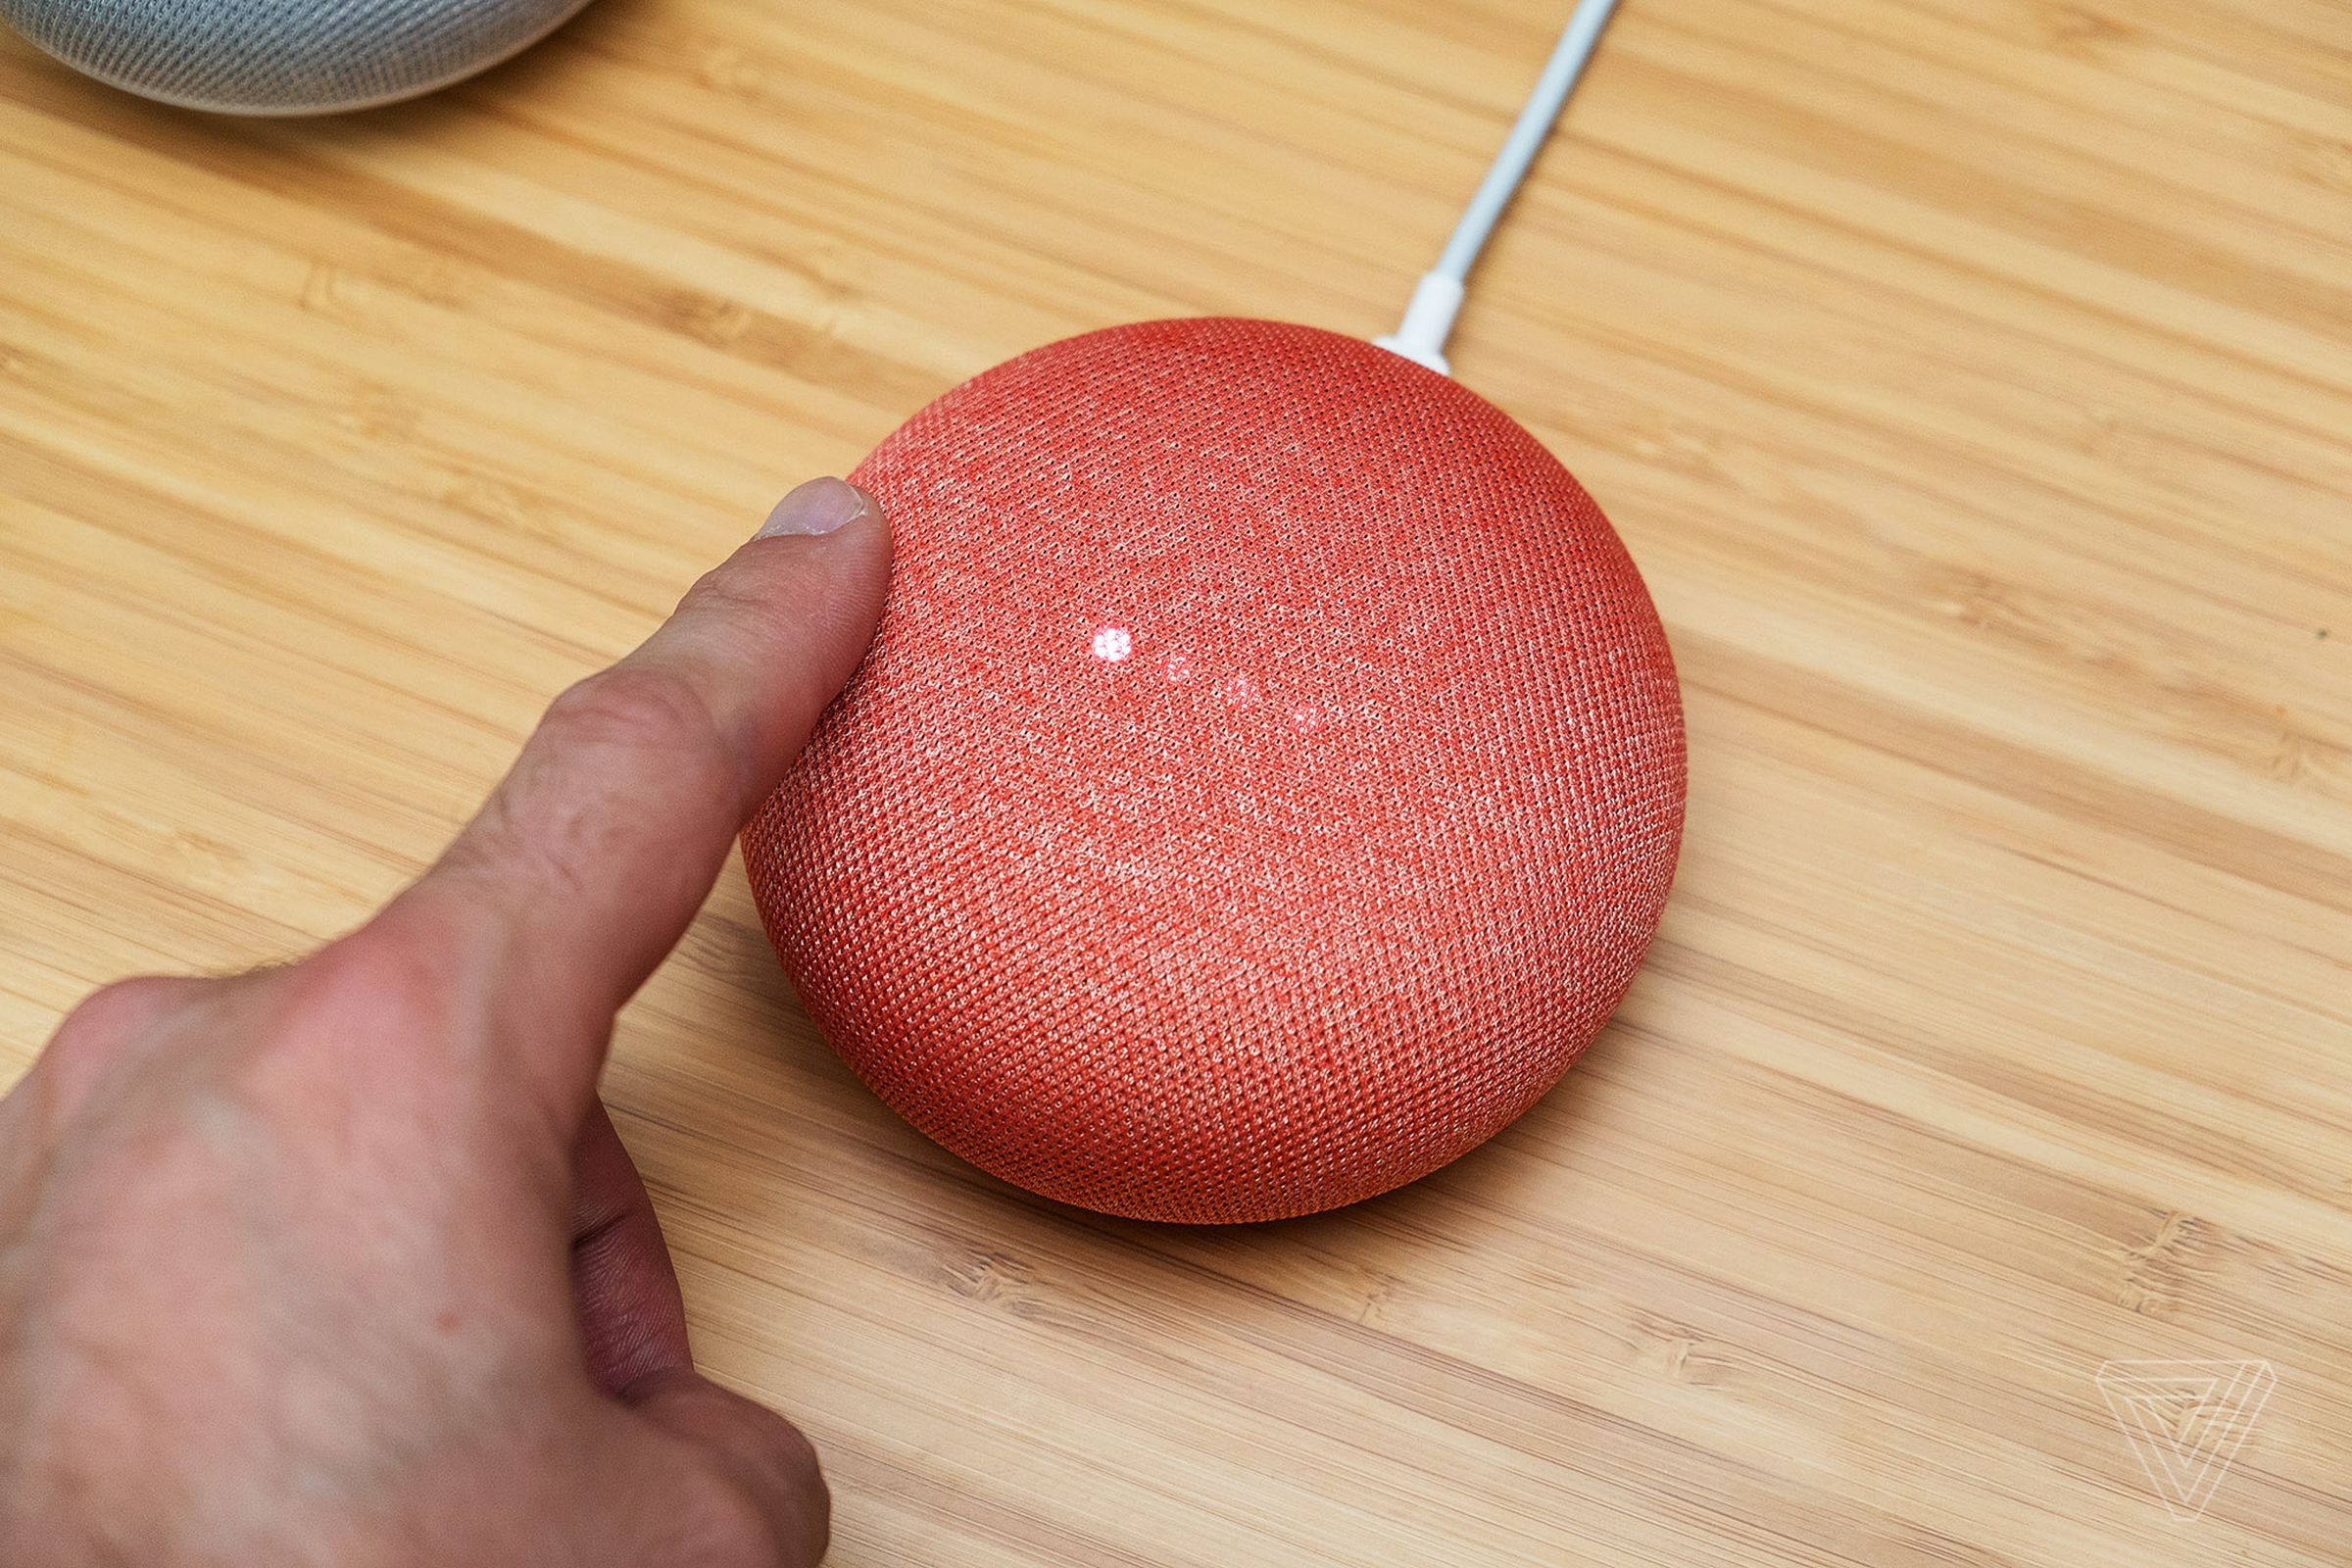 After the Home Mini disaster, I can understand why Google is looking for touch sensor engineers. 